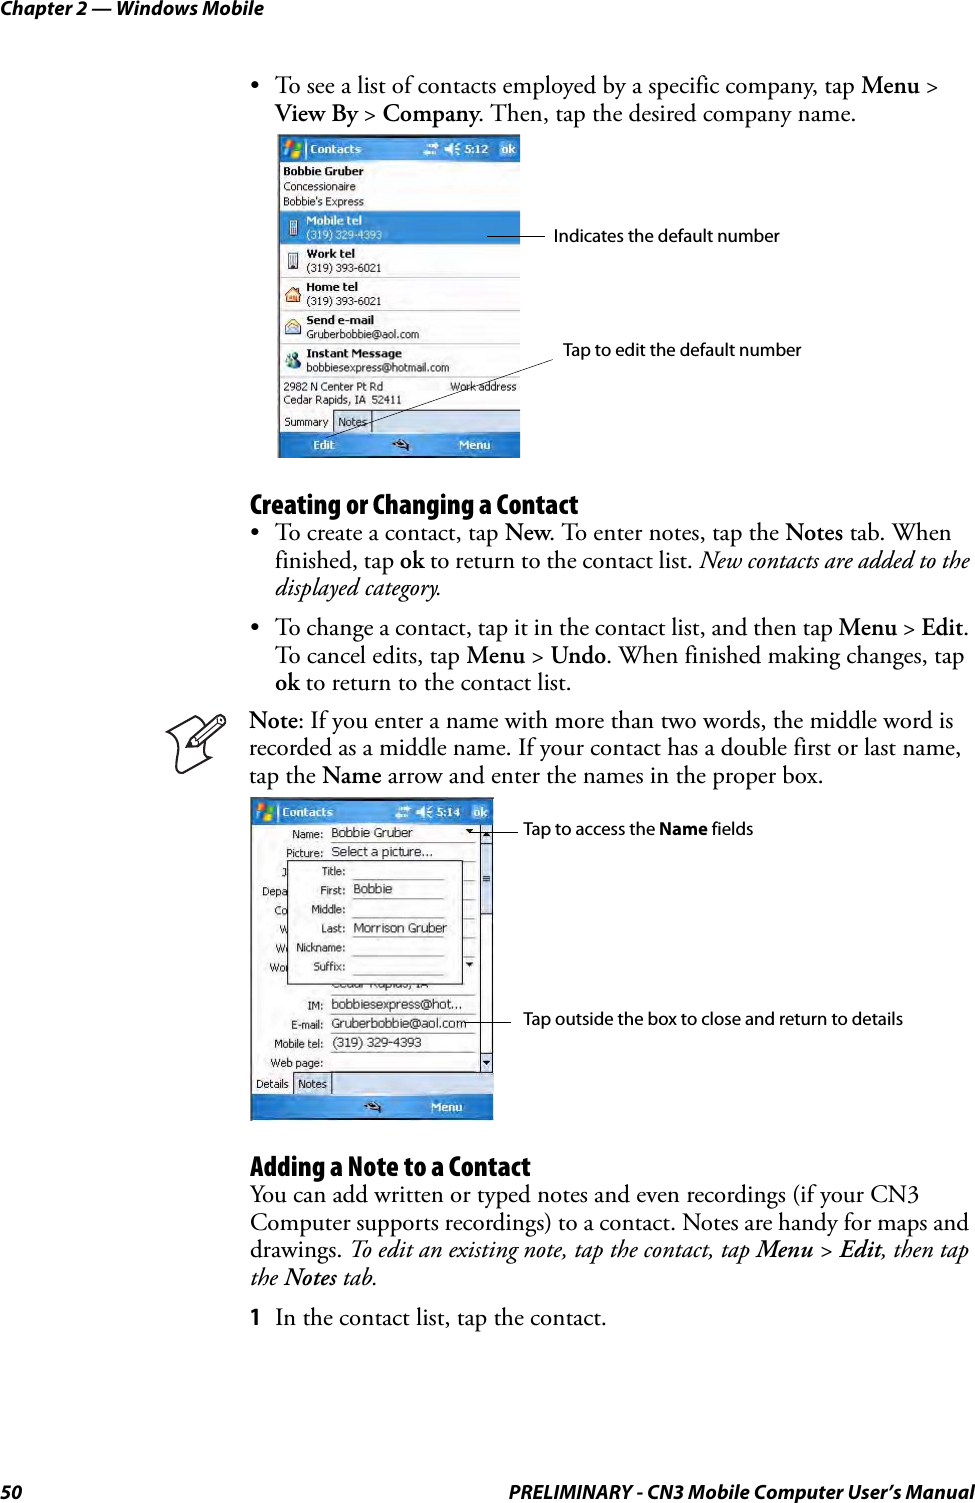 Chapter 2 — Windows Mobile50 PRELIMINARY - CN3 Mobile Computer User’s Manual• To see a list of contacts employed by a specific company, tap Menu &gt; View By &gt; Company. Then, tap the desired company name.Creating or Changing a Contact• To create a contact, tap New. To enter notes, tap the Notes tab. When finished, tap ok to return to the contact list. New contacts are added to the displayed category.• To change a contact, tap it in the contact list, and then tap Menu &gt; Edit. To cancel edits, tap Menu &gt; Undo. When finished making changes, tap ok to return to the contact list.Adding a Note to a ContactYou can add written or typed notes and even recordings (if your CN3 Computer supports recordings) to a contact. Notes are handy for maps and drawings. To edit an existing note, tap the contact, tap Menu &gt; Edit, then tap the Notes tab.1In the contact list, tap the contact.Note: If you enter a name with more than two words, the middle word is recorded as a middle name. If your contact has a double first or last name, tap the Name arrow and enter the names in the proper box.Indicates the default numberTap to edit the default numberTap to access the Name fieldsTap outside the box to close and return to details